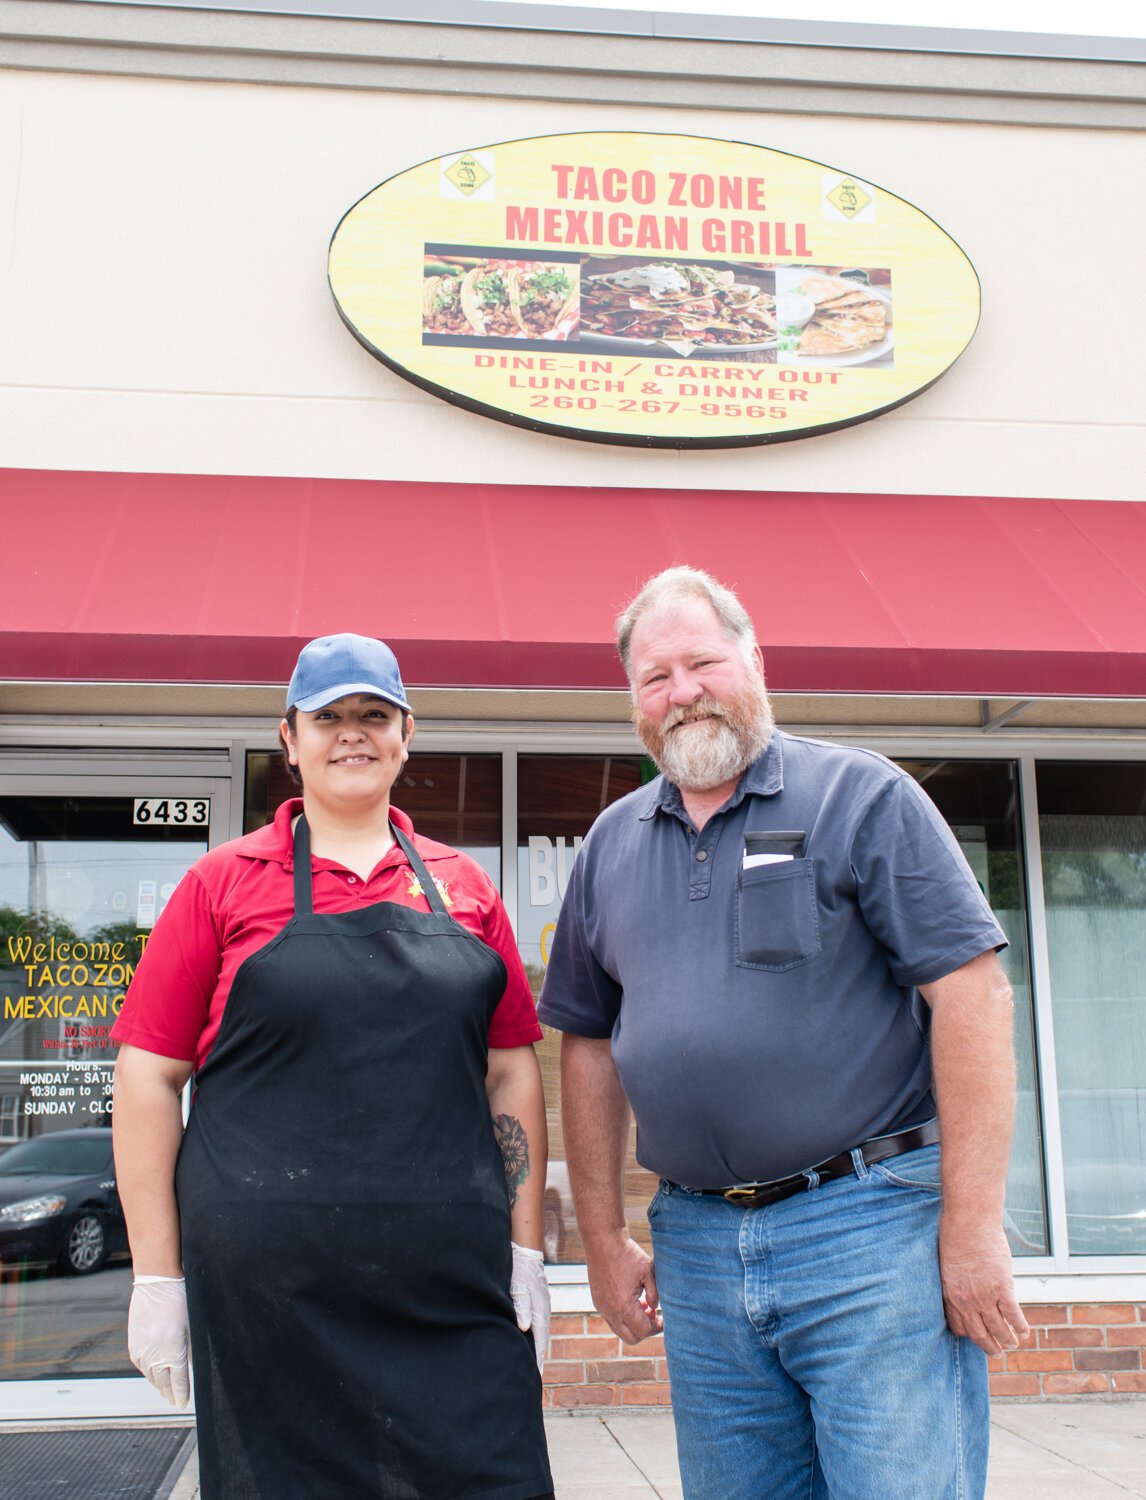 Wood Farms' owner Dennis Wood sells beef and pork to local restauranteurs, like Lizet Colin, Owner of Taco Zone at 6433 Bluffton Rd.